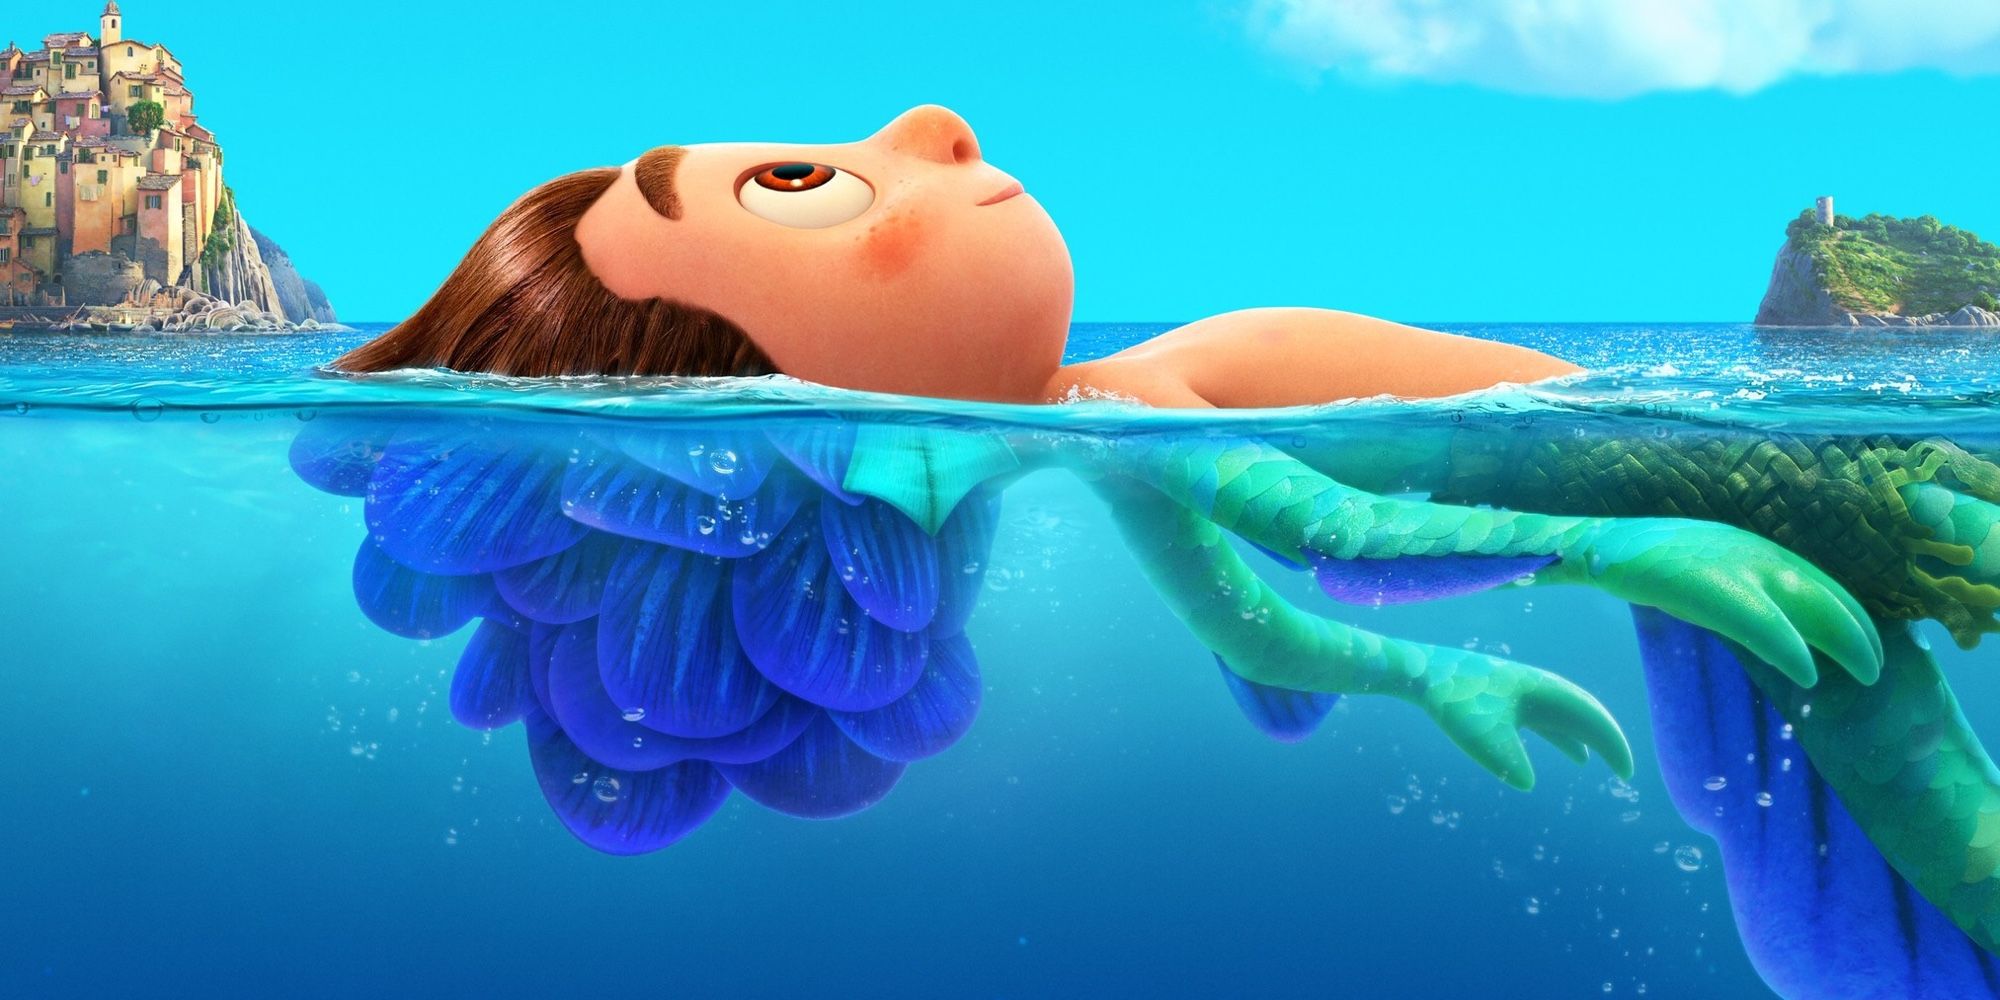 Luca 10 Exciting Things We Already Know About The Latest Pixar Movie